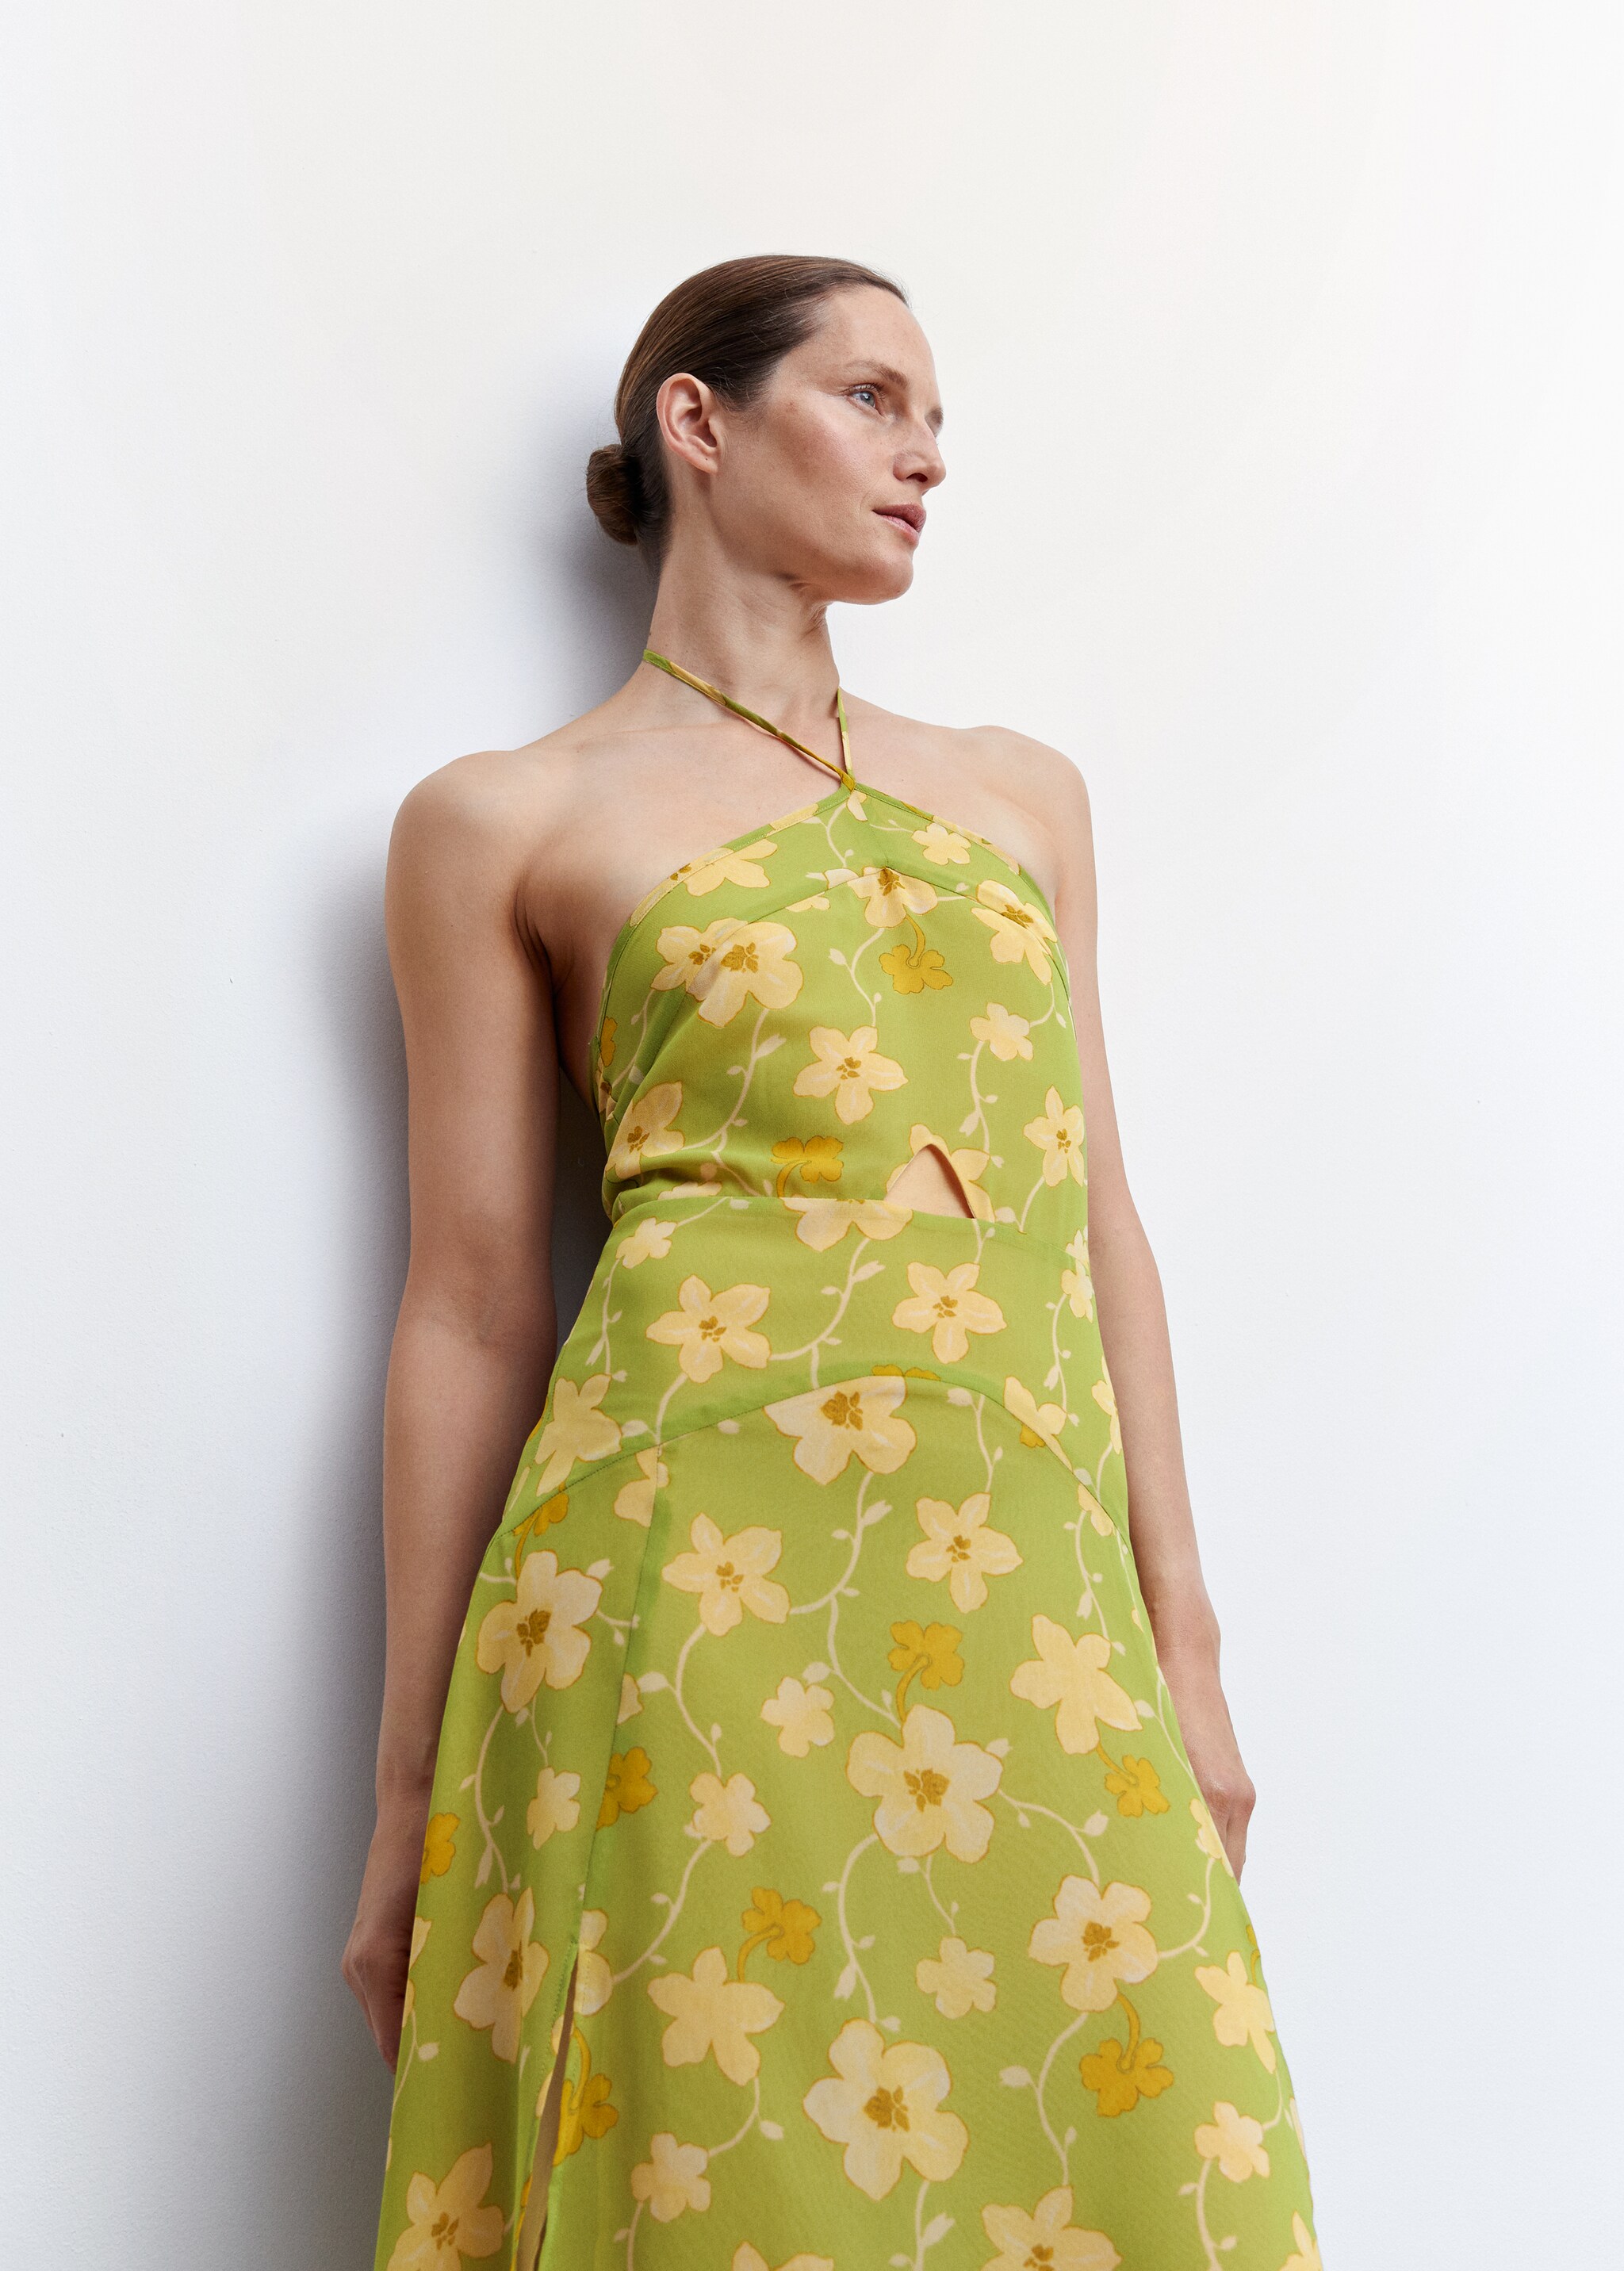 Flower print dress - Details of the article 2